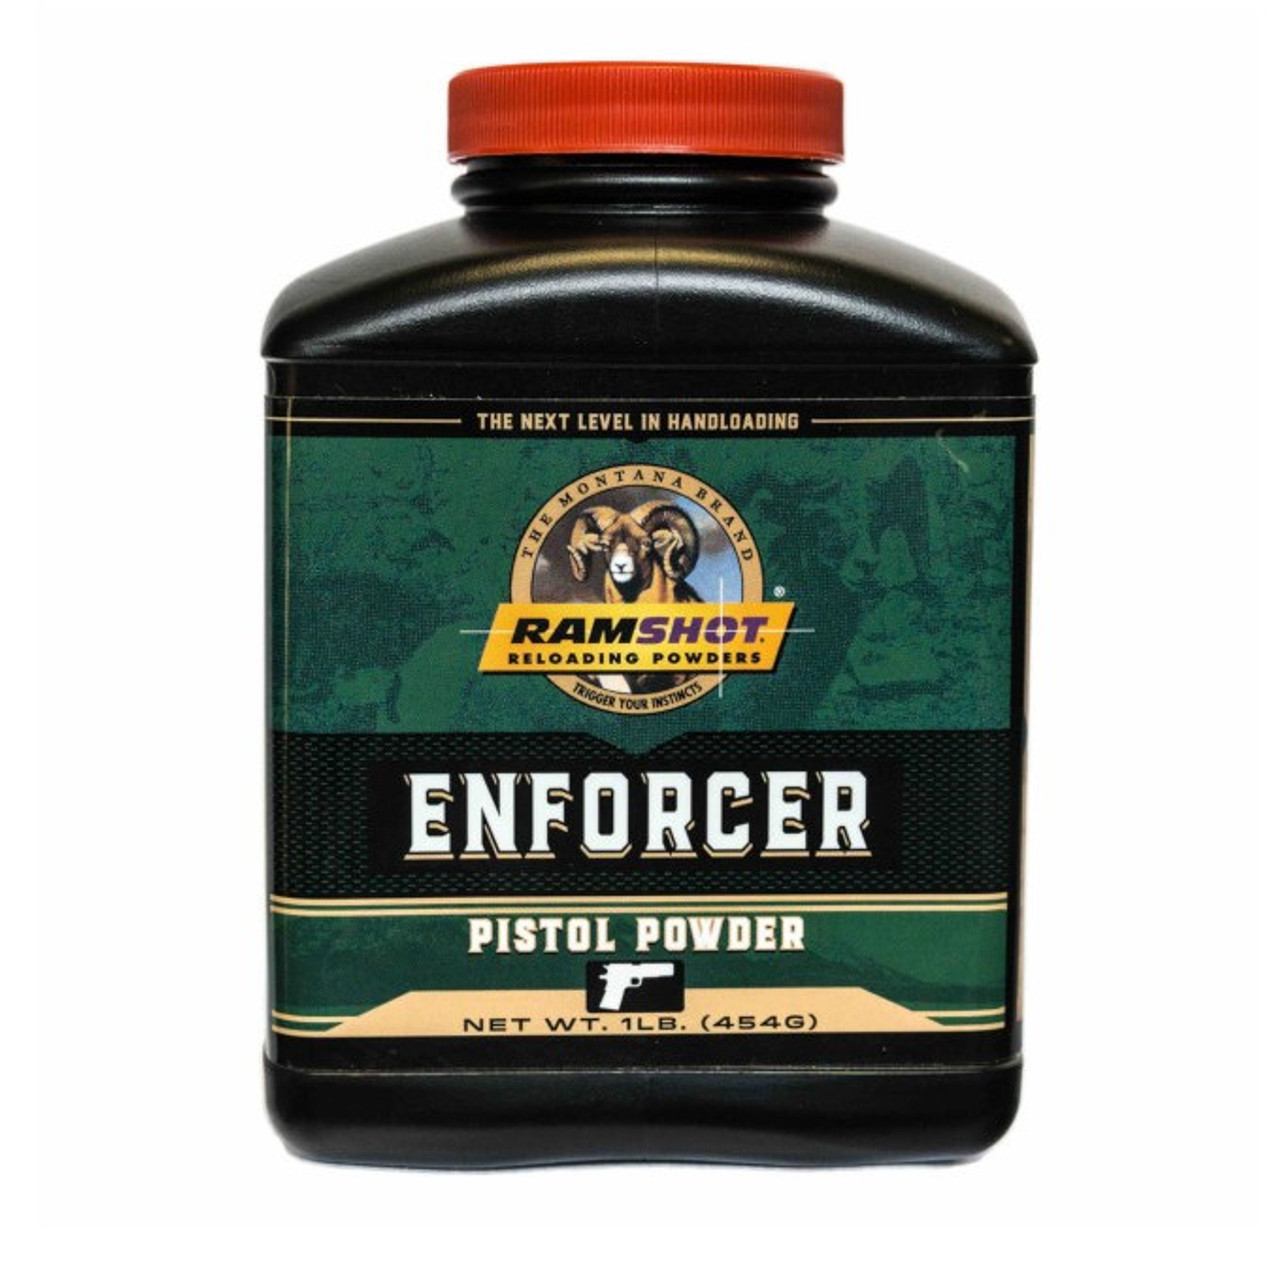 ENFORCER is the best choice for high performance, full power loads in magnum handgun cartridges. It is ideally suited for the 44 Magnum, 454 Casull, 460 S&W, and the 500 S&W. It’s is a double-base spherical powder with excellent metering qualities that meets the performance expectations of serious magnum handgun shooters. Made in Belgium.